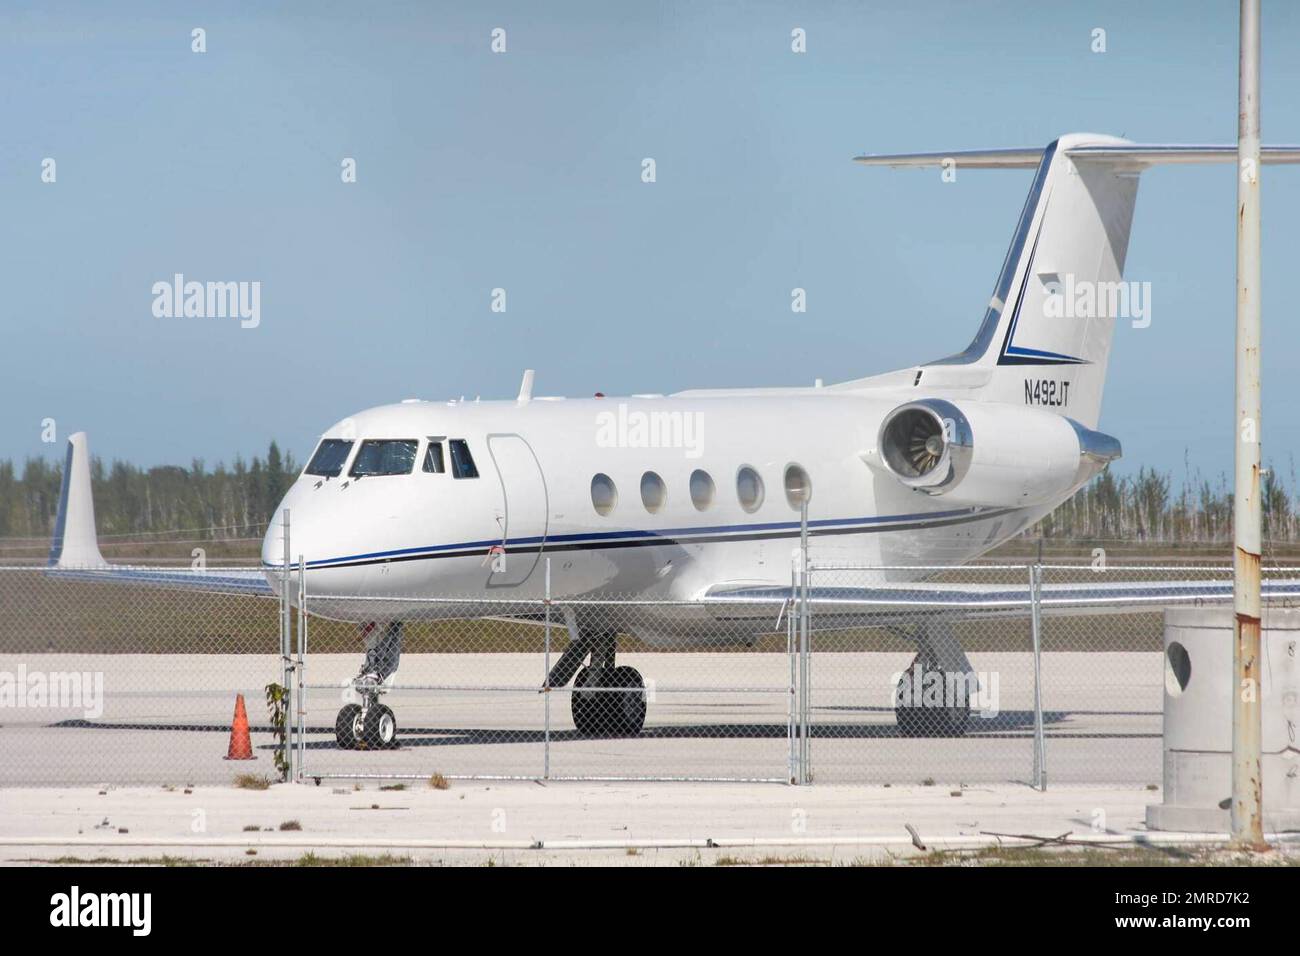 General views of John Travolta's jet at the Grand Bahama International Airport. John Travolta's son, Jett, will reportedly be taken to the Restview Memorial Mortuary and Crematorium in the Bahamas. A local viewing will be held before he is flown to the U.S. for burial on Tuesday. Jett Travolta reportedly suffered a seizure and died after hitting his head on a bathtub during a family vacation in Freeport, Bahamas. 1/3/09. Stock Photo